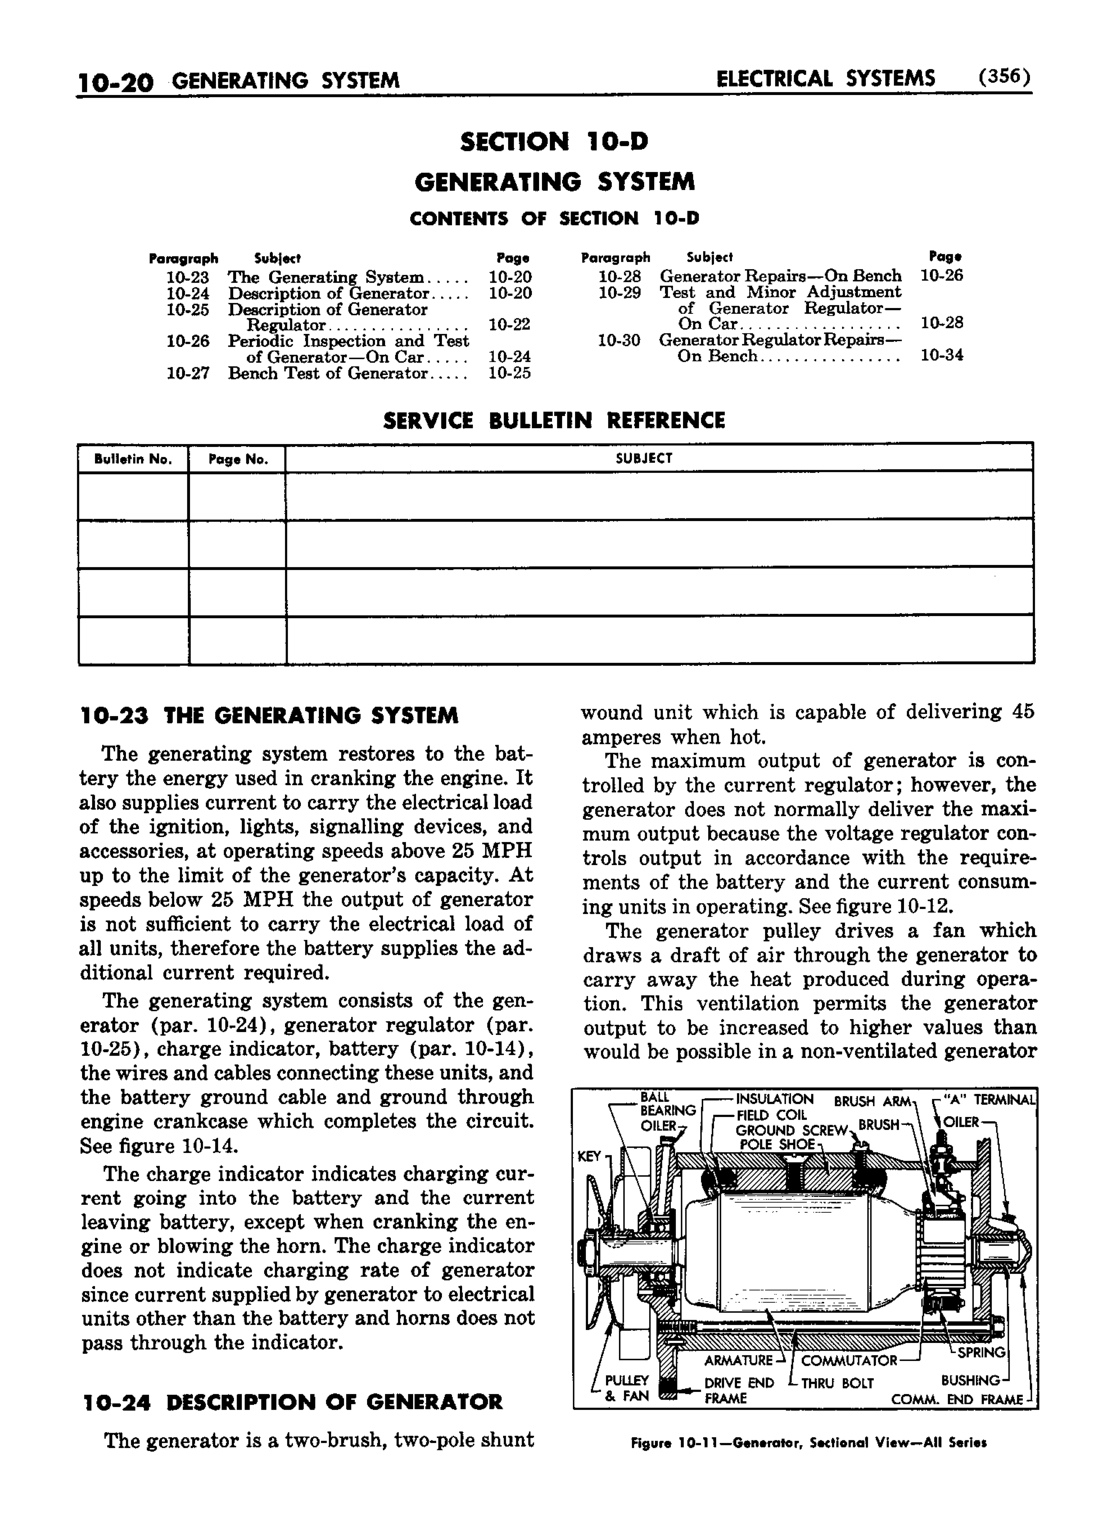 n_11 1952 Buick Shop Manual - Electrical Systems-020-020.jpg